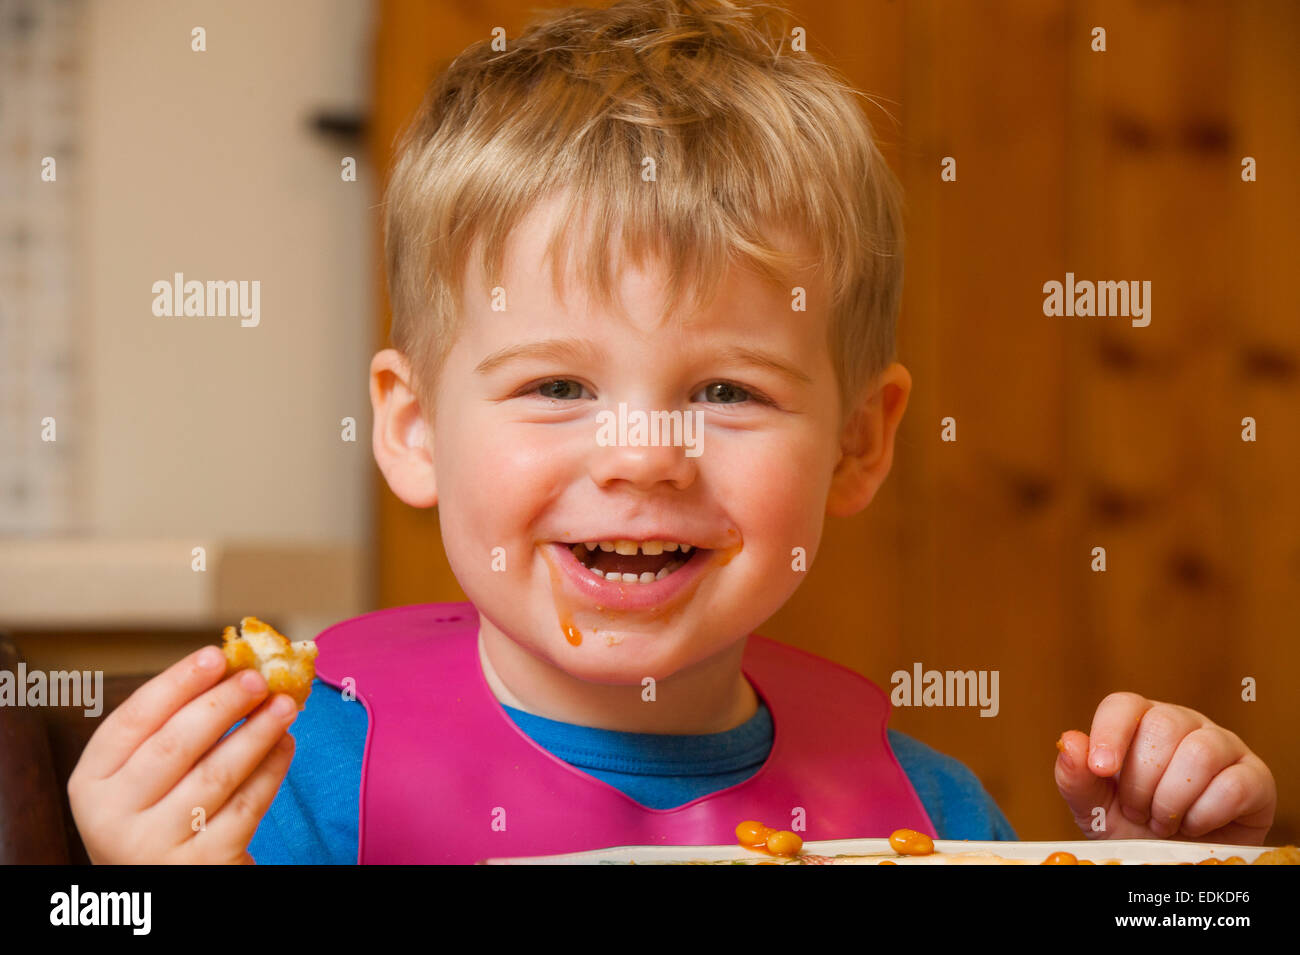 A happy two year old child eating chicken nuggets and baked beans. Stock Photo